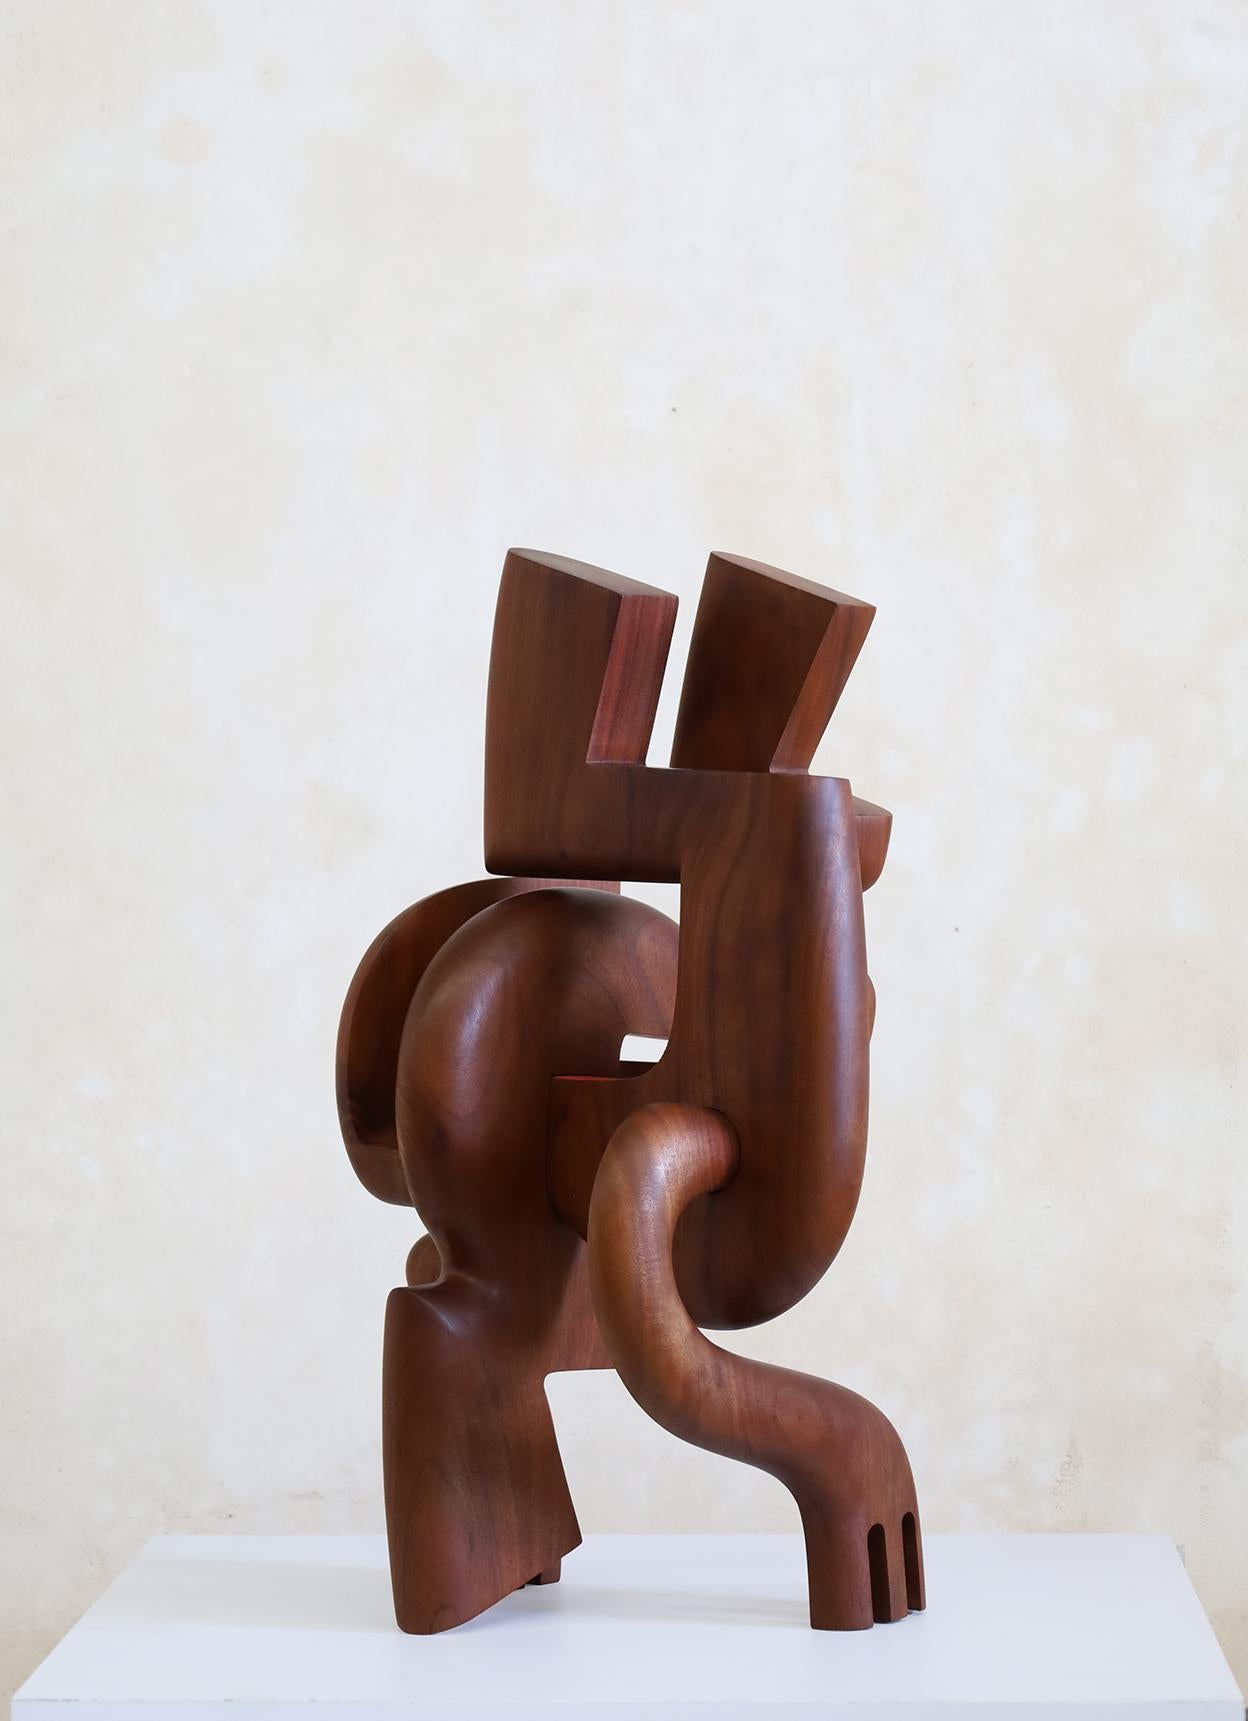 Magdiel Garcia is a contemporary Cuban artist whose work evolves around the human figure, volumes and color. He is passionate about wood, which he selects very carefully to obtain an inmense sensual dimension in his pieces.  Each sculpture from